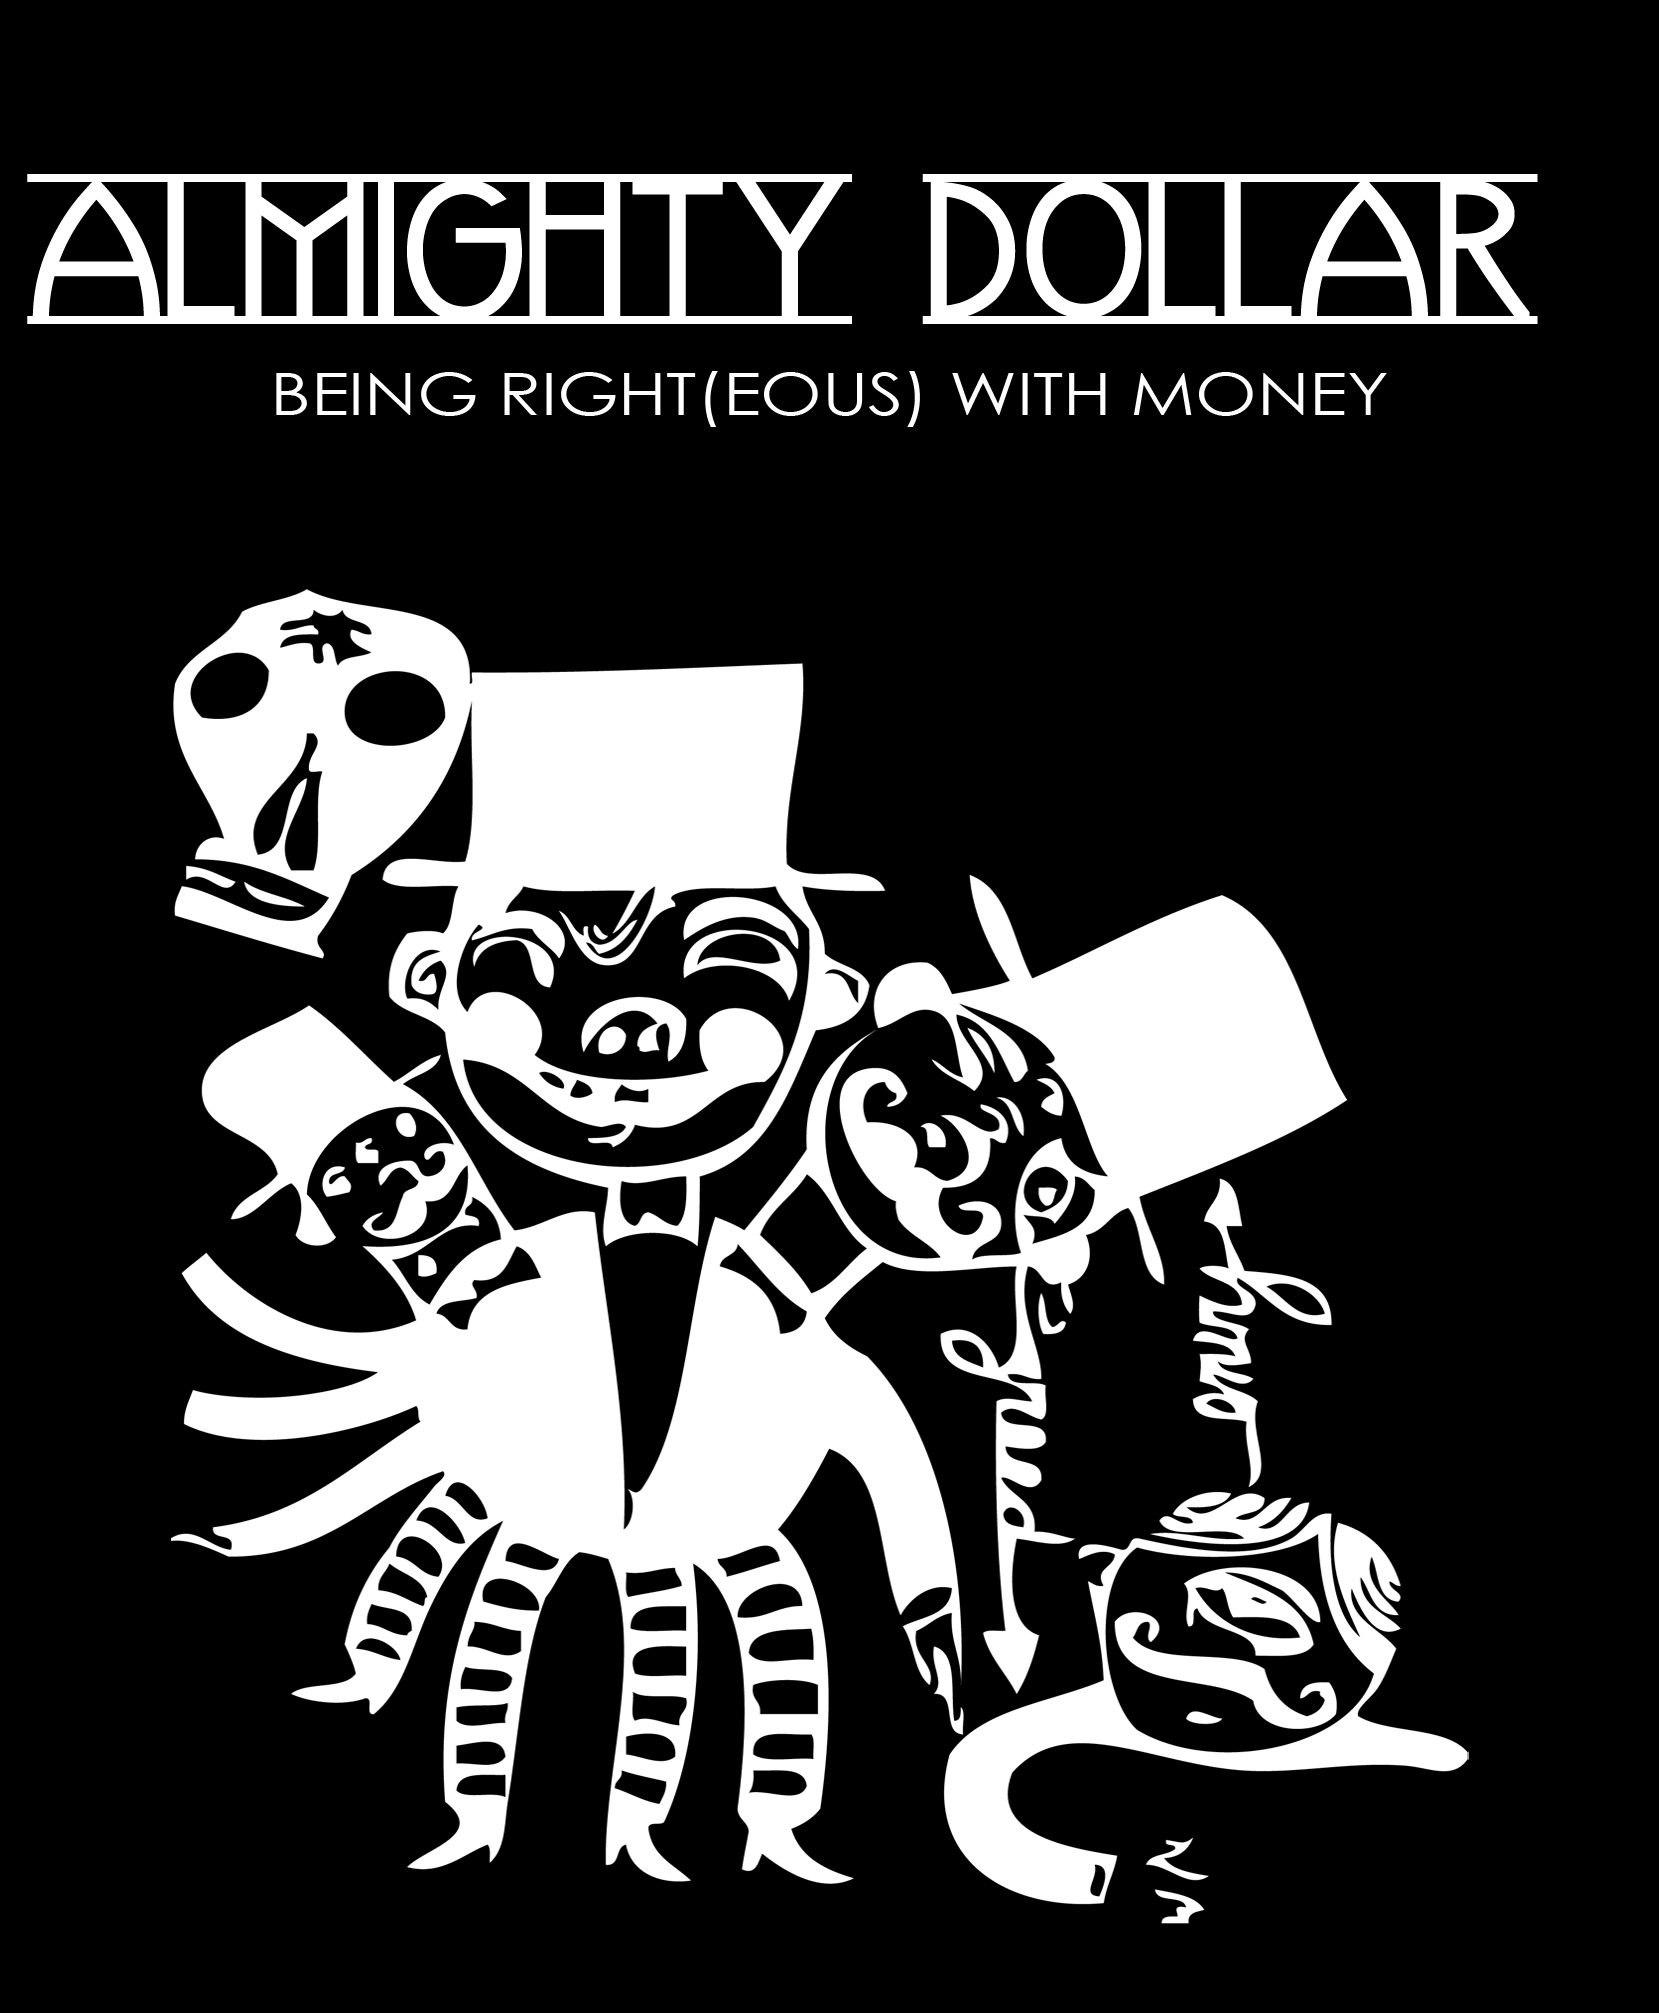 Almighty Dollar: being righteous with money